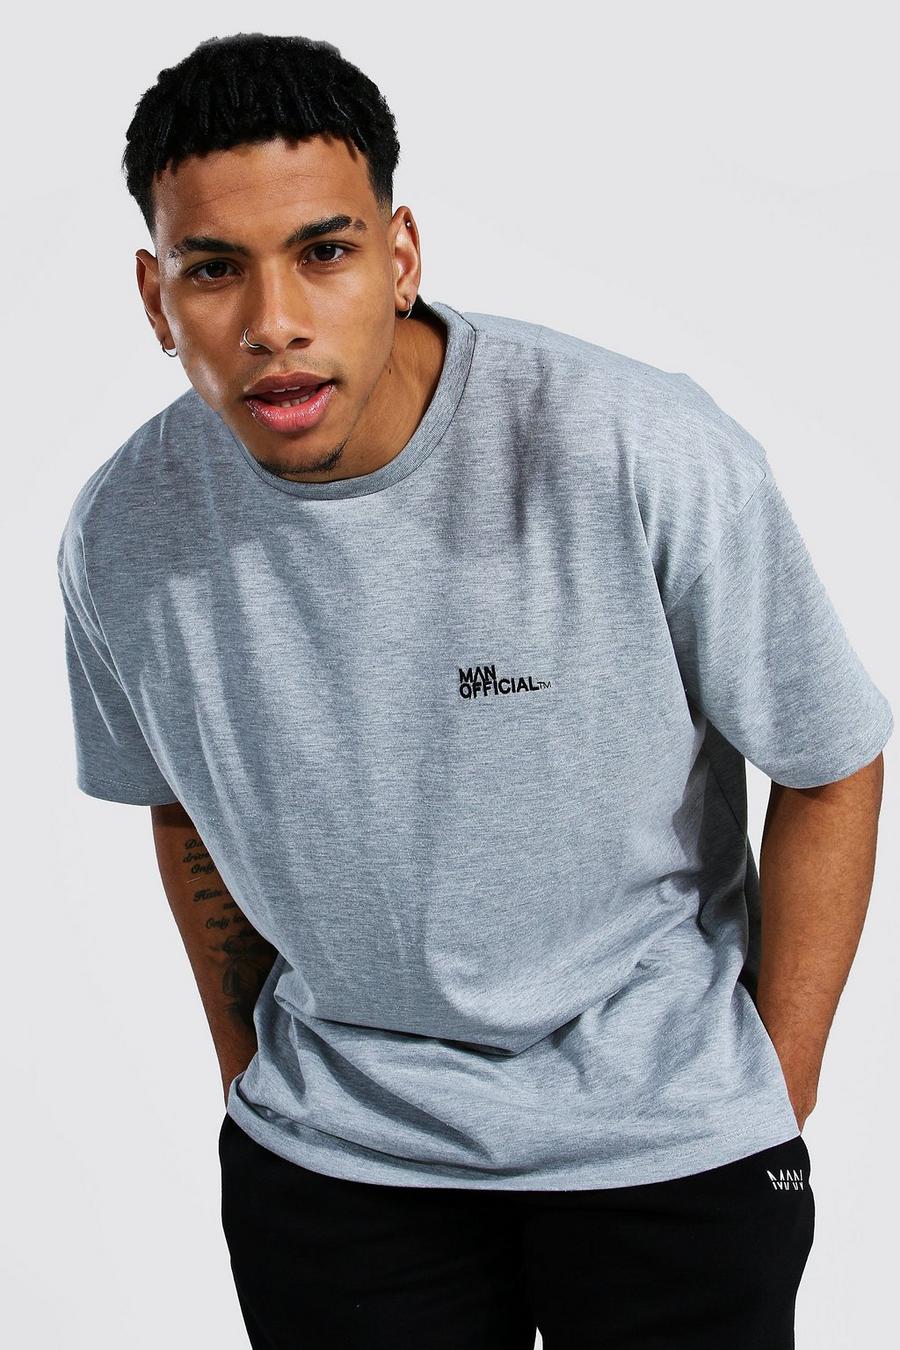 Grey marl Oversized Man Official Heavyweight T-shirt image number 1